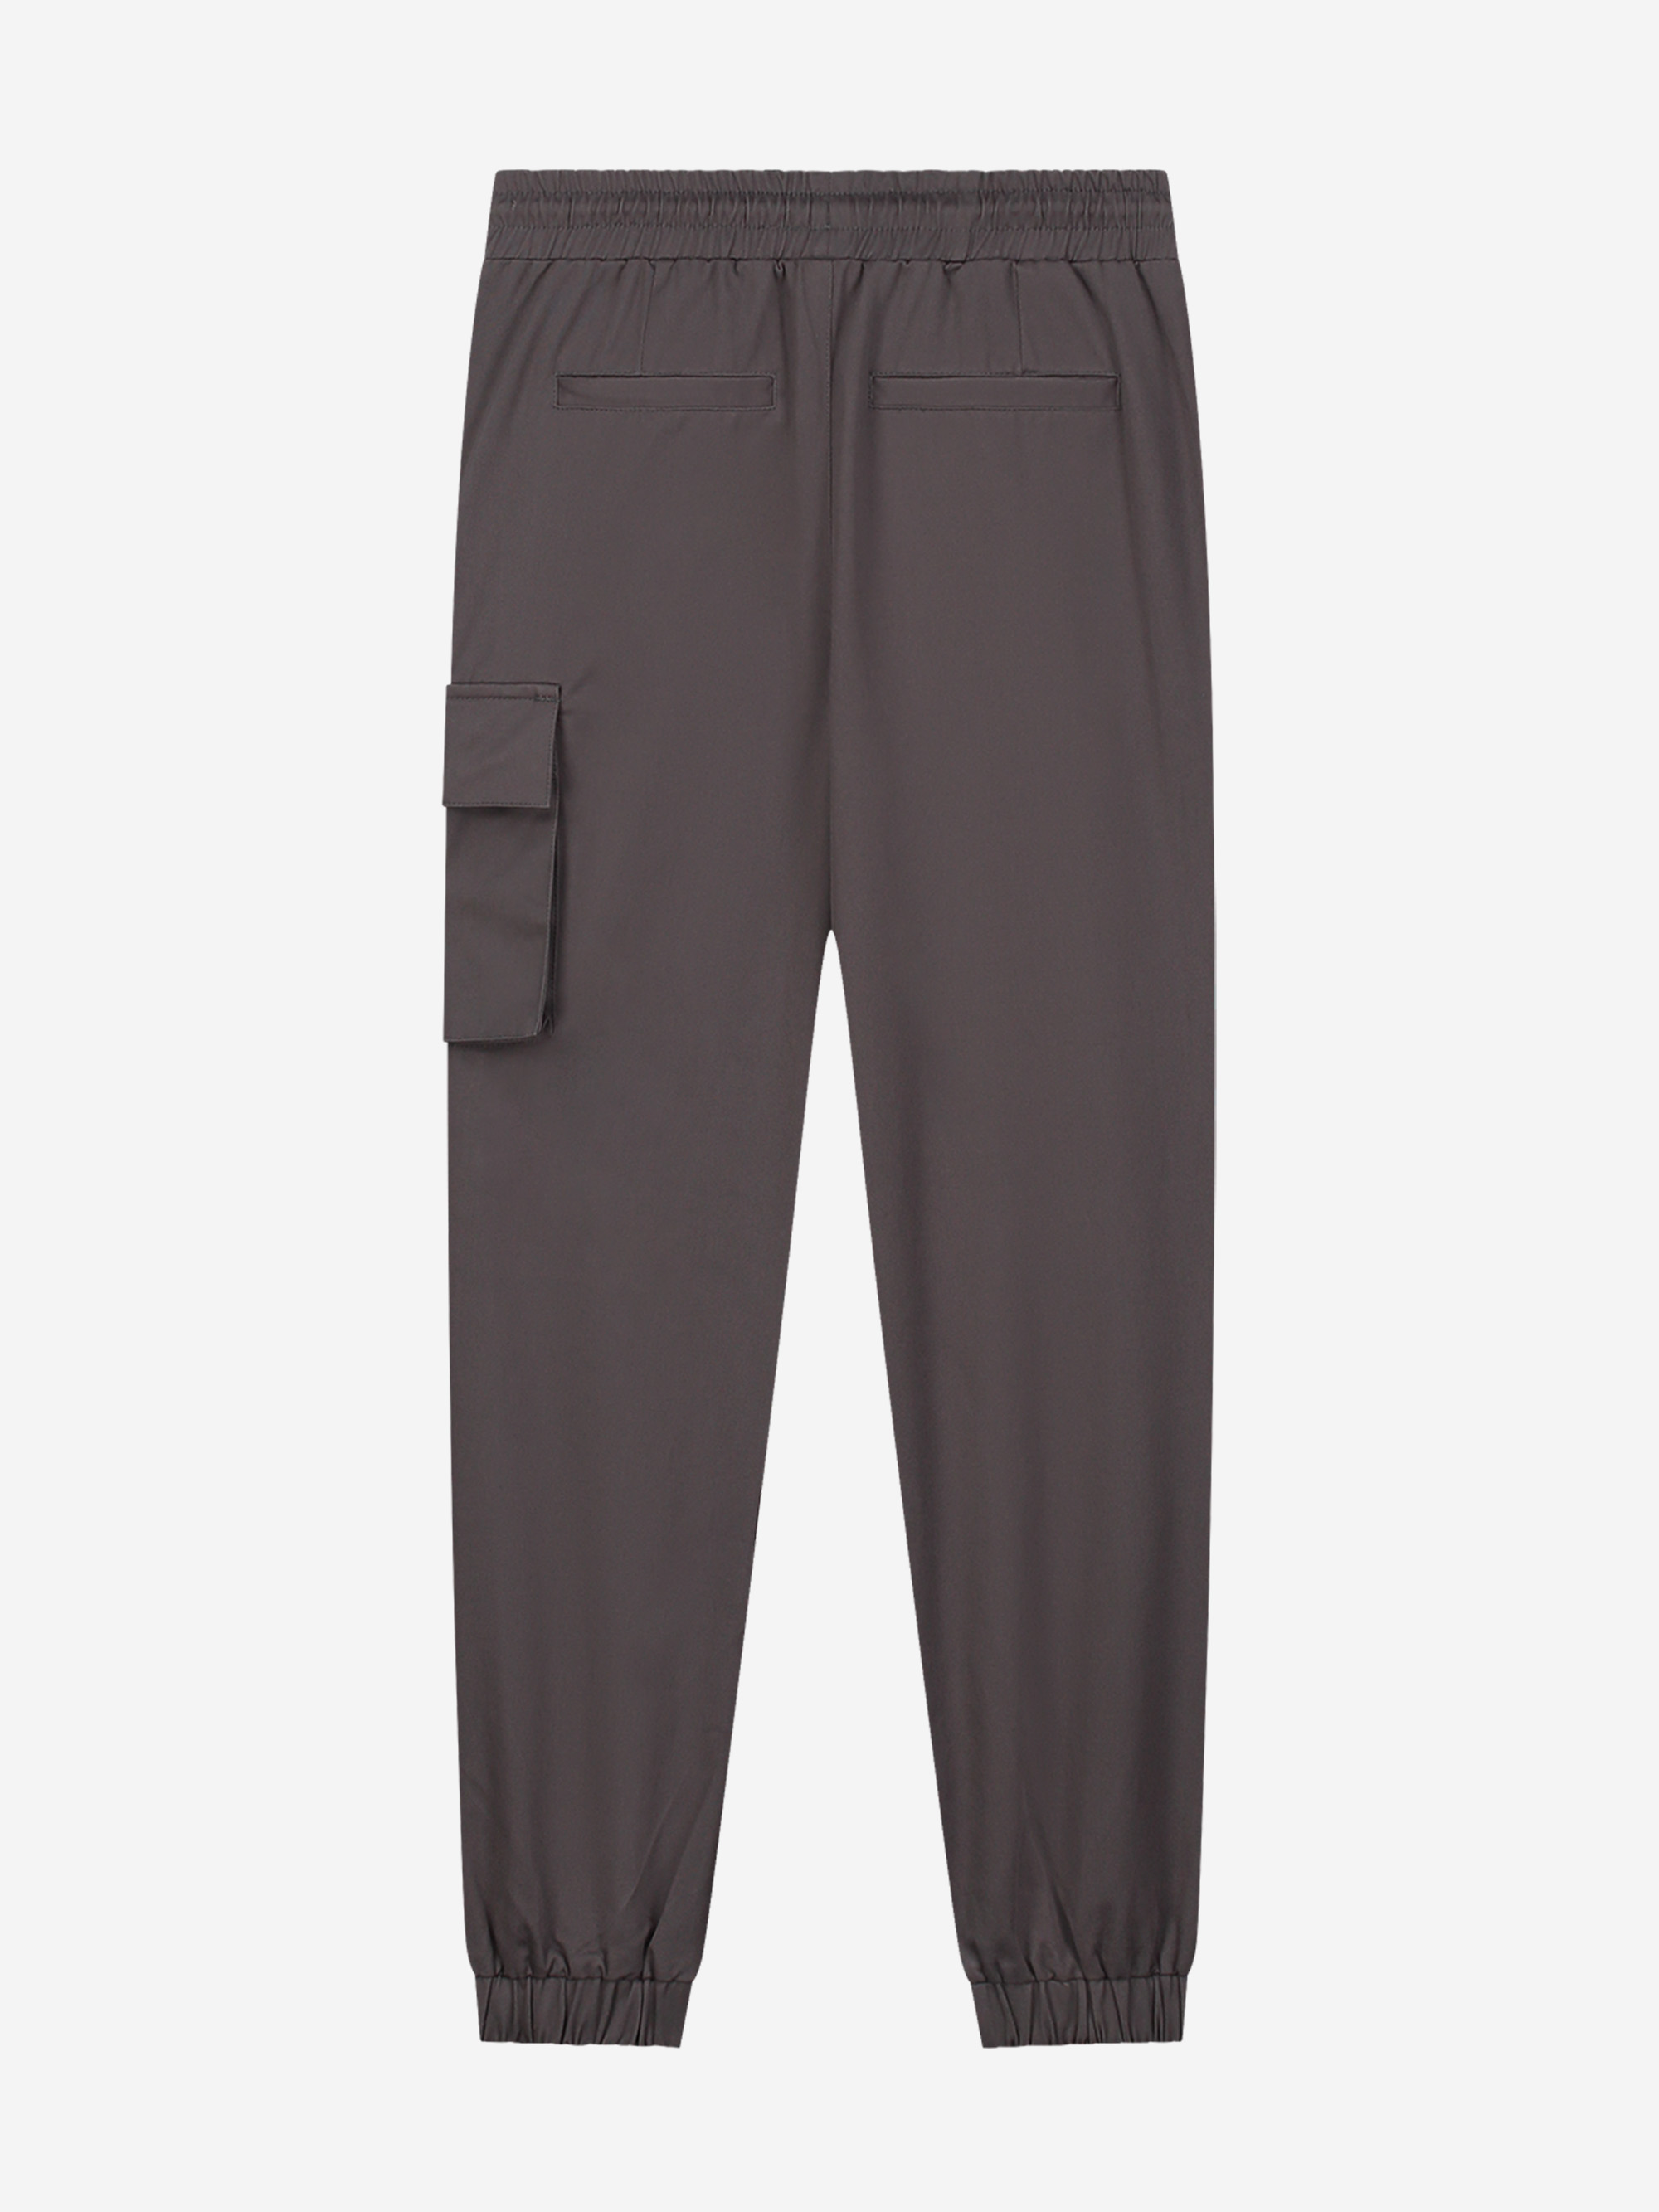 Trouser with side pocket